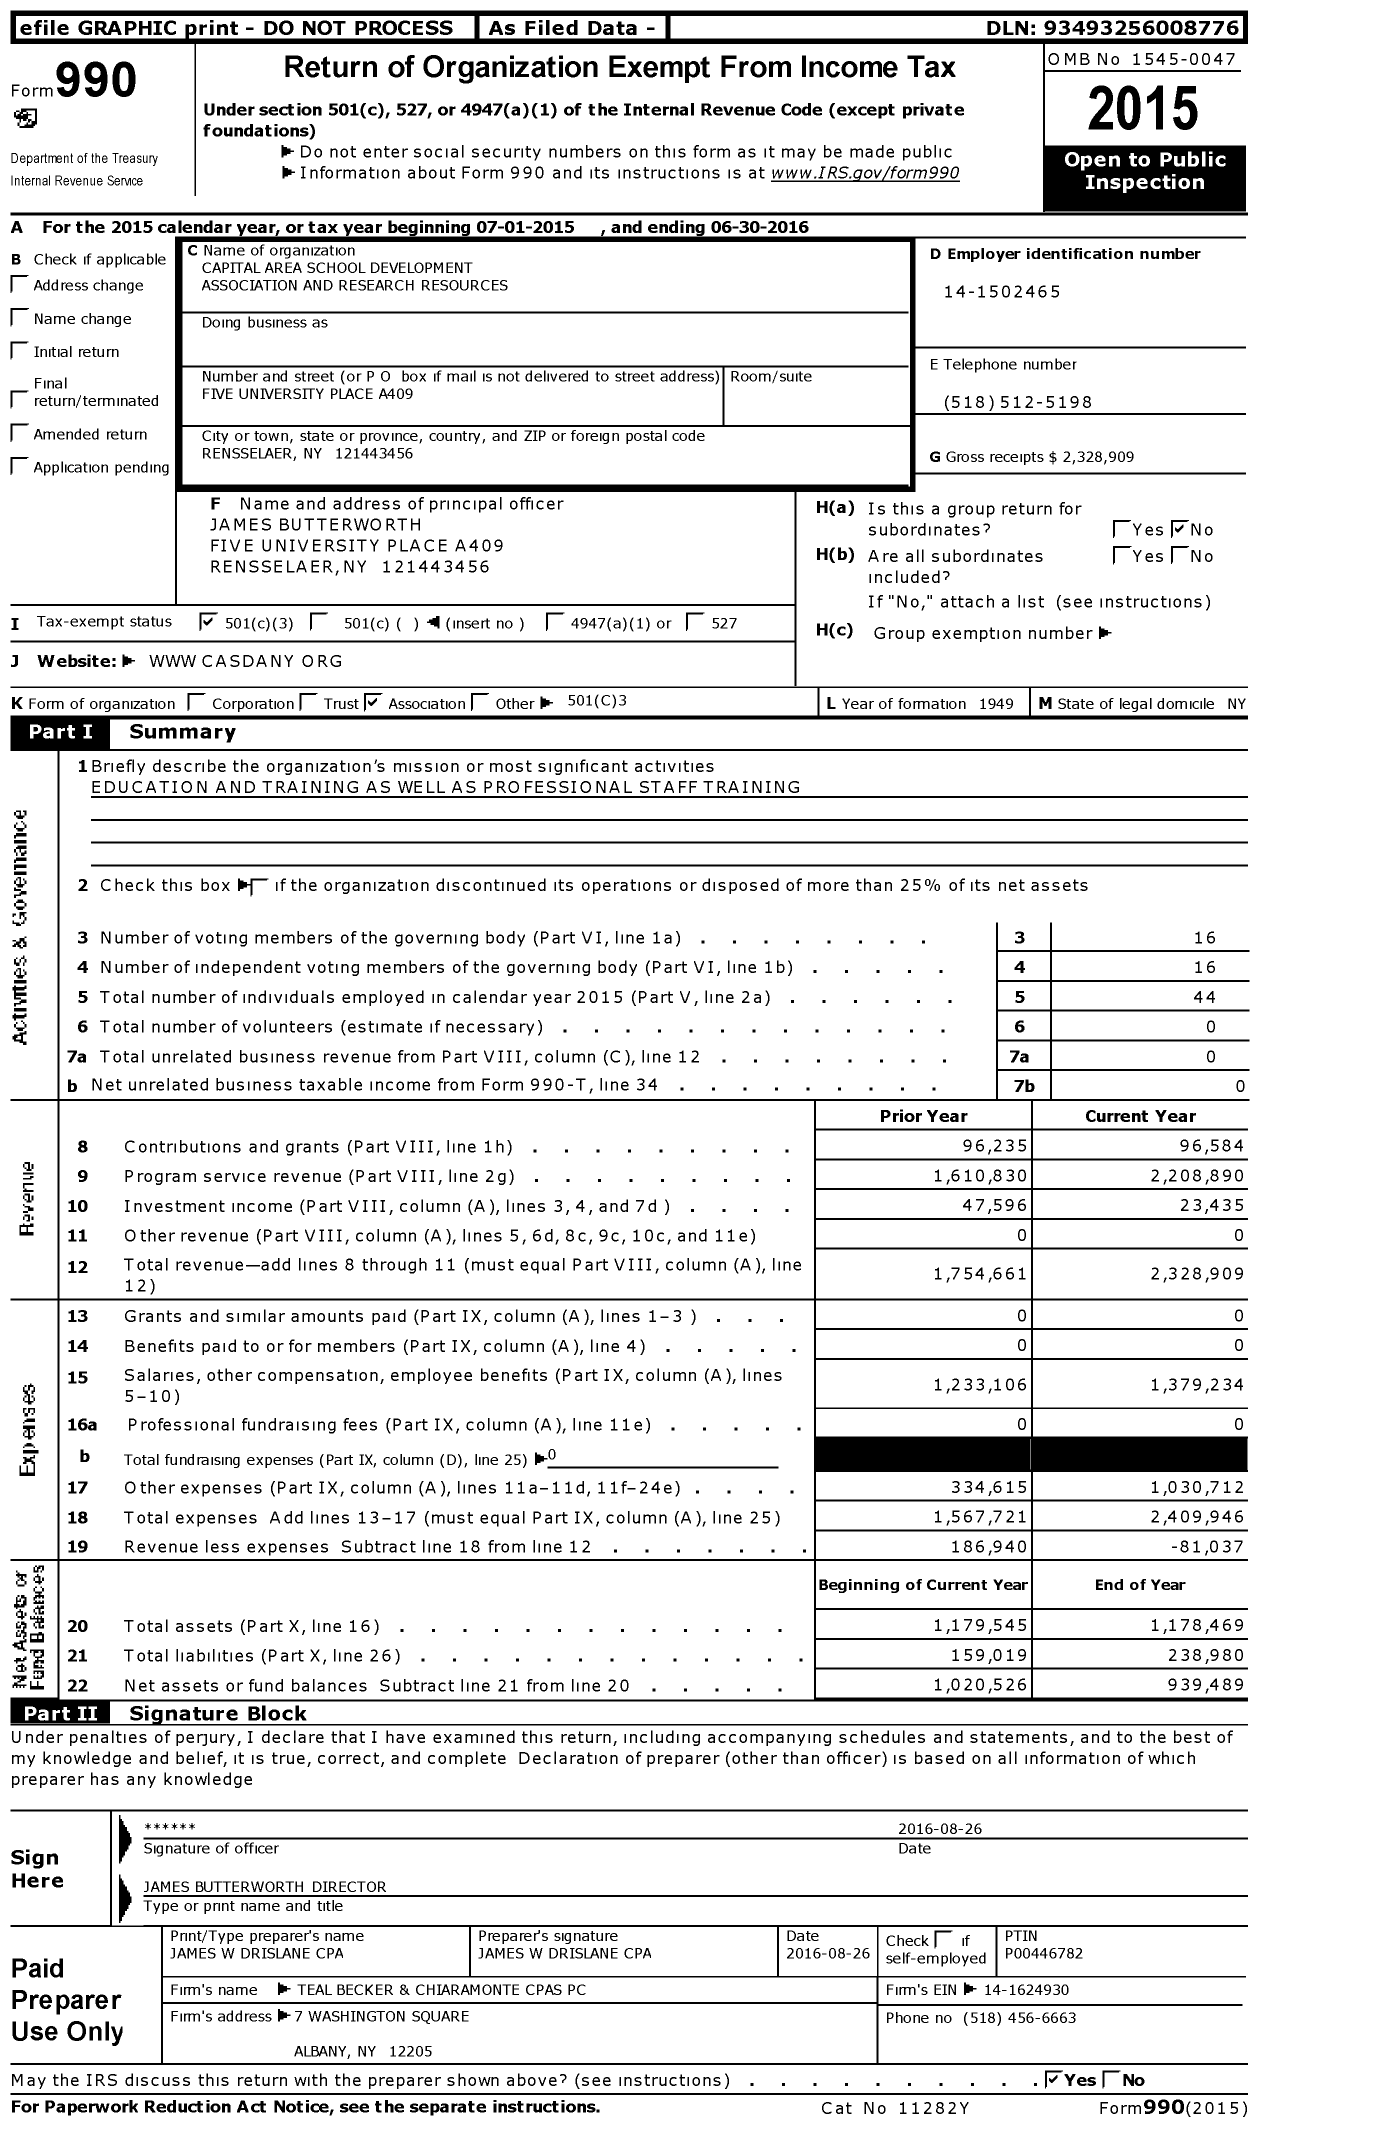 Image of first page of 2015 Form 990 for Capital Area School Development Association (CASDA)